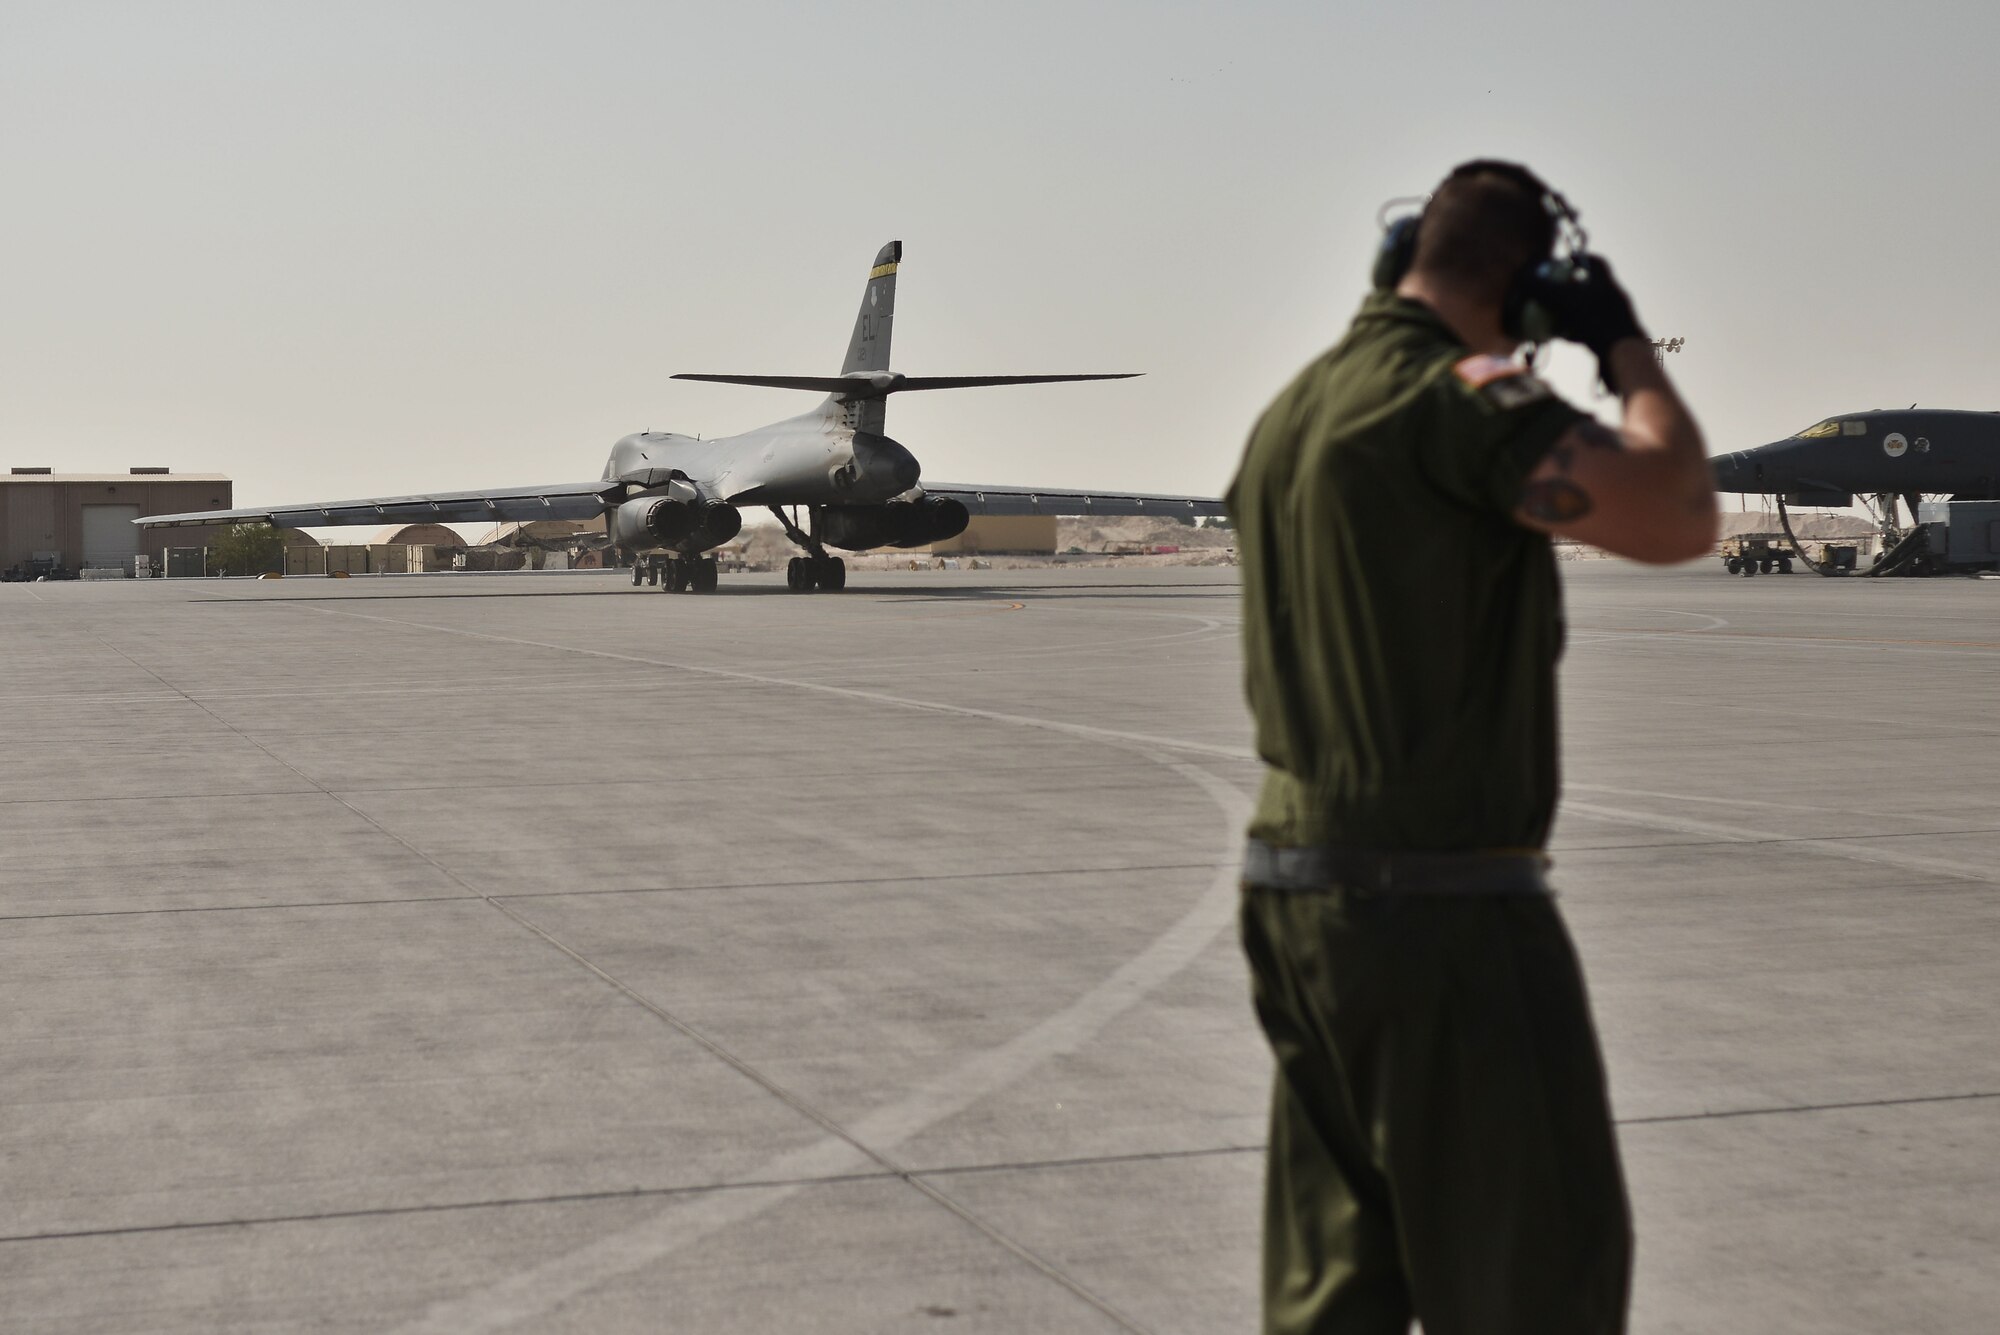 Staff Sgt. Bryant, 28th Aircraft Maintenance Squadron crew chief, watches as his B-1 bomber moves towards the flightline for take-off Sept. 22, 2015 at Al Udeid Air Base, Qatar. Bryant was deployed out of Ellsworth Air Force Base, S.D. (U.S. Air Force photo by Staff Sgt. Alexandre Montes/Released)